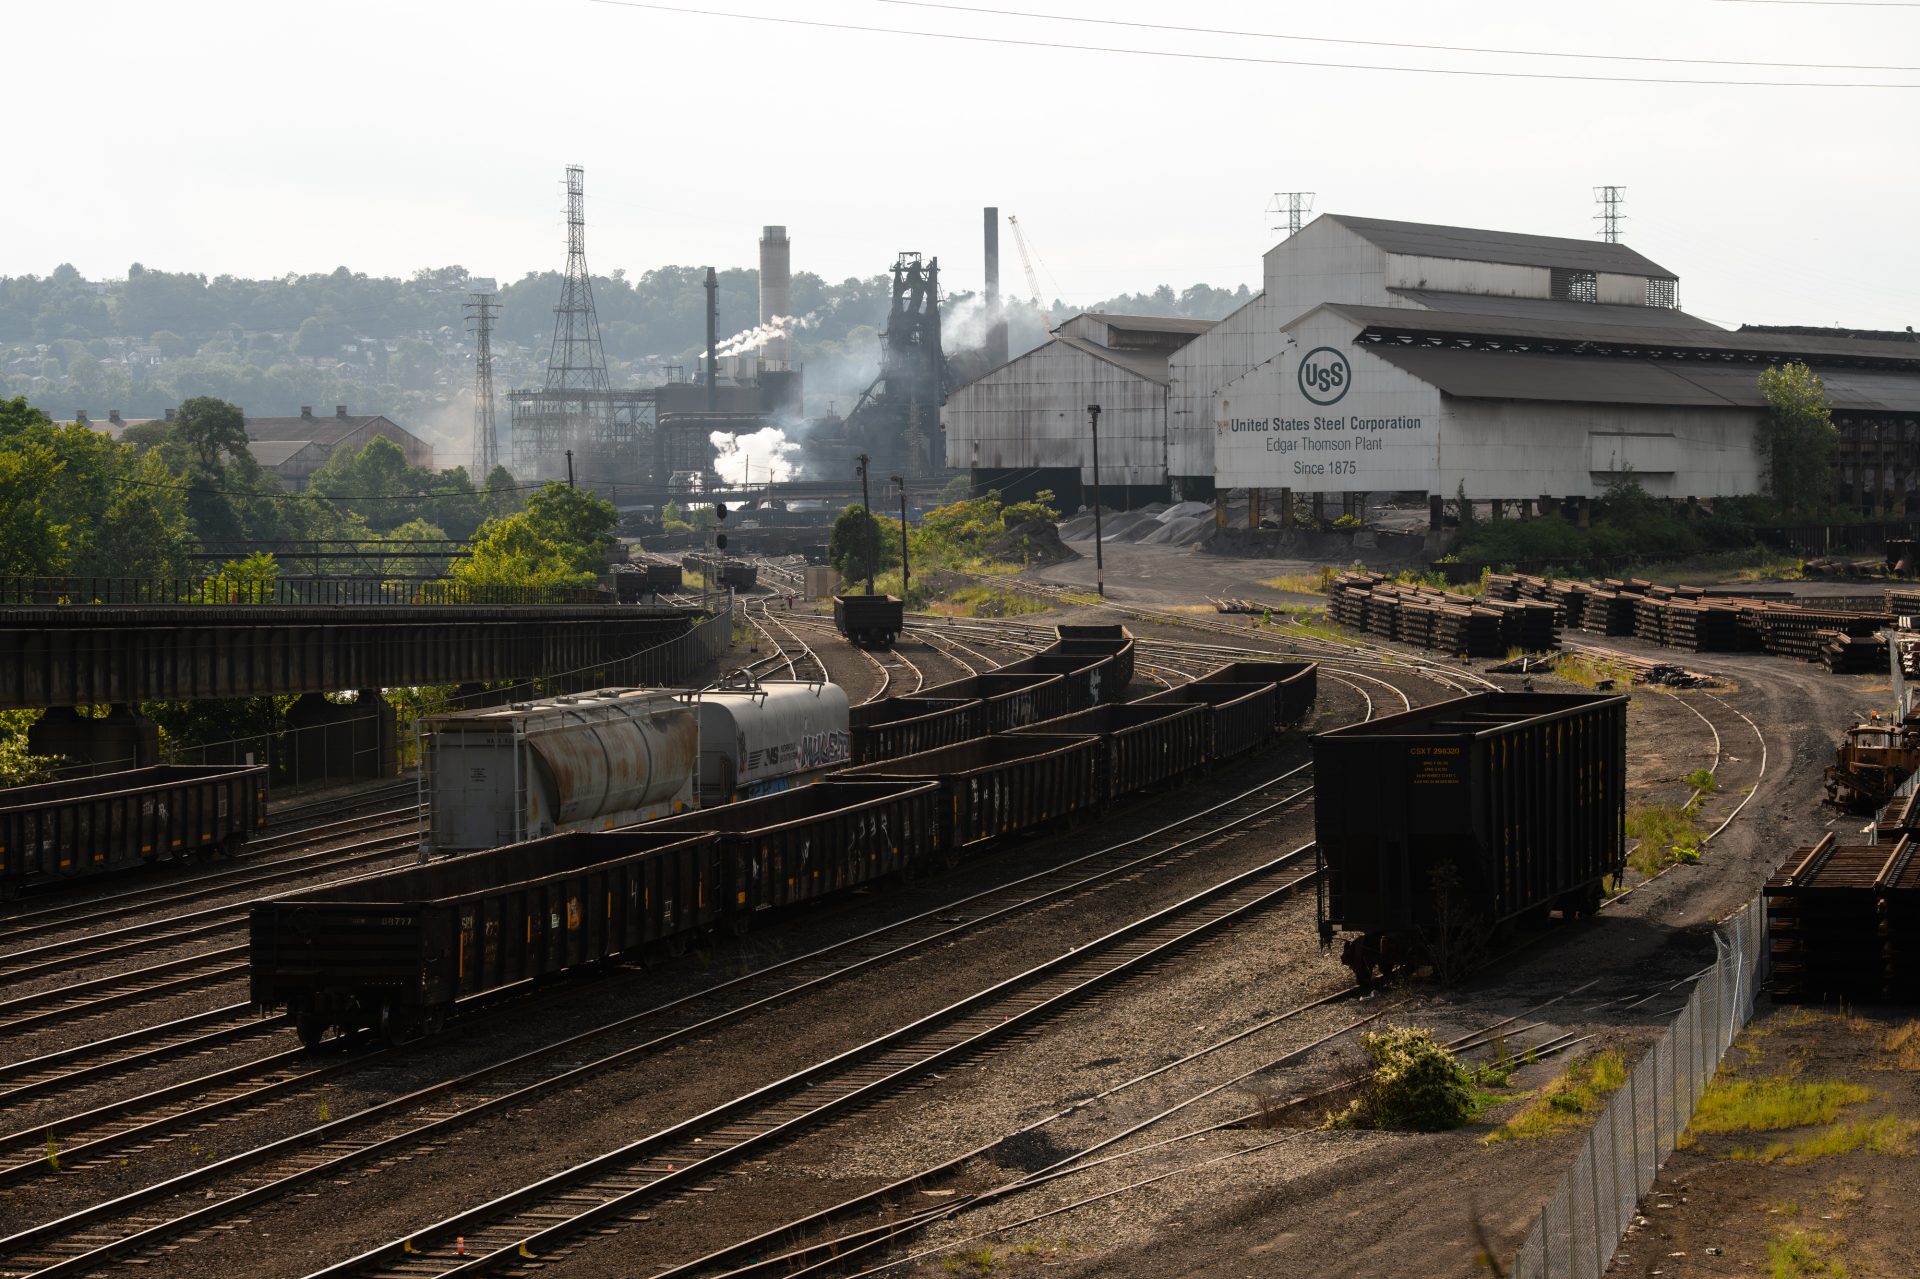 United States Steel's Edgar Thomson Plant seen in Braddock, Pa., on Sept. 12. Rep. Lee represents this area, which still has an active steel mill.